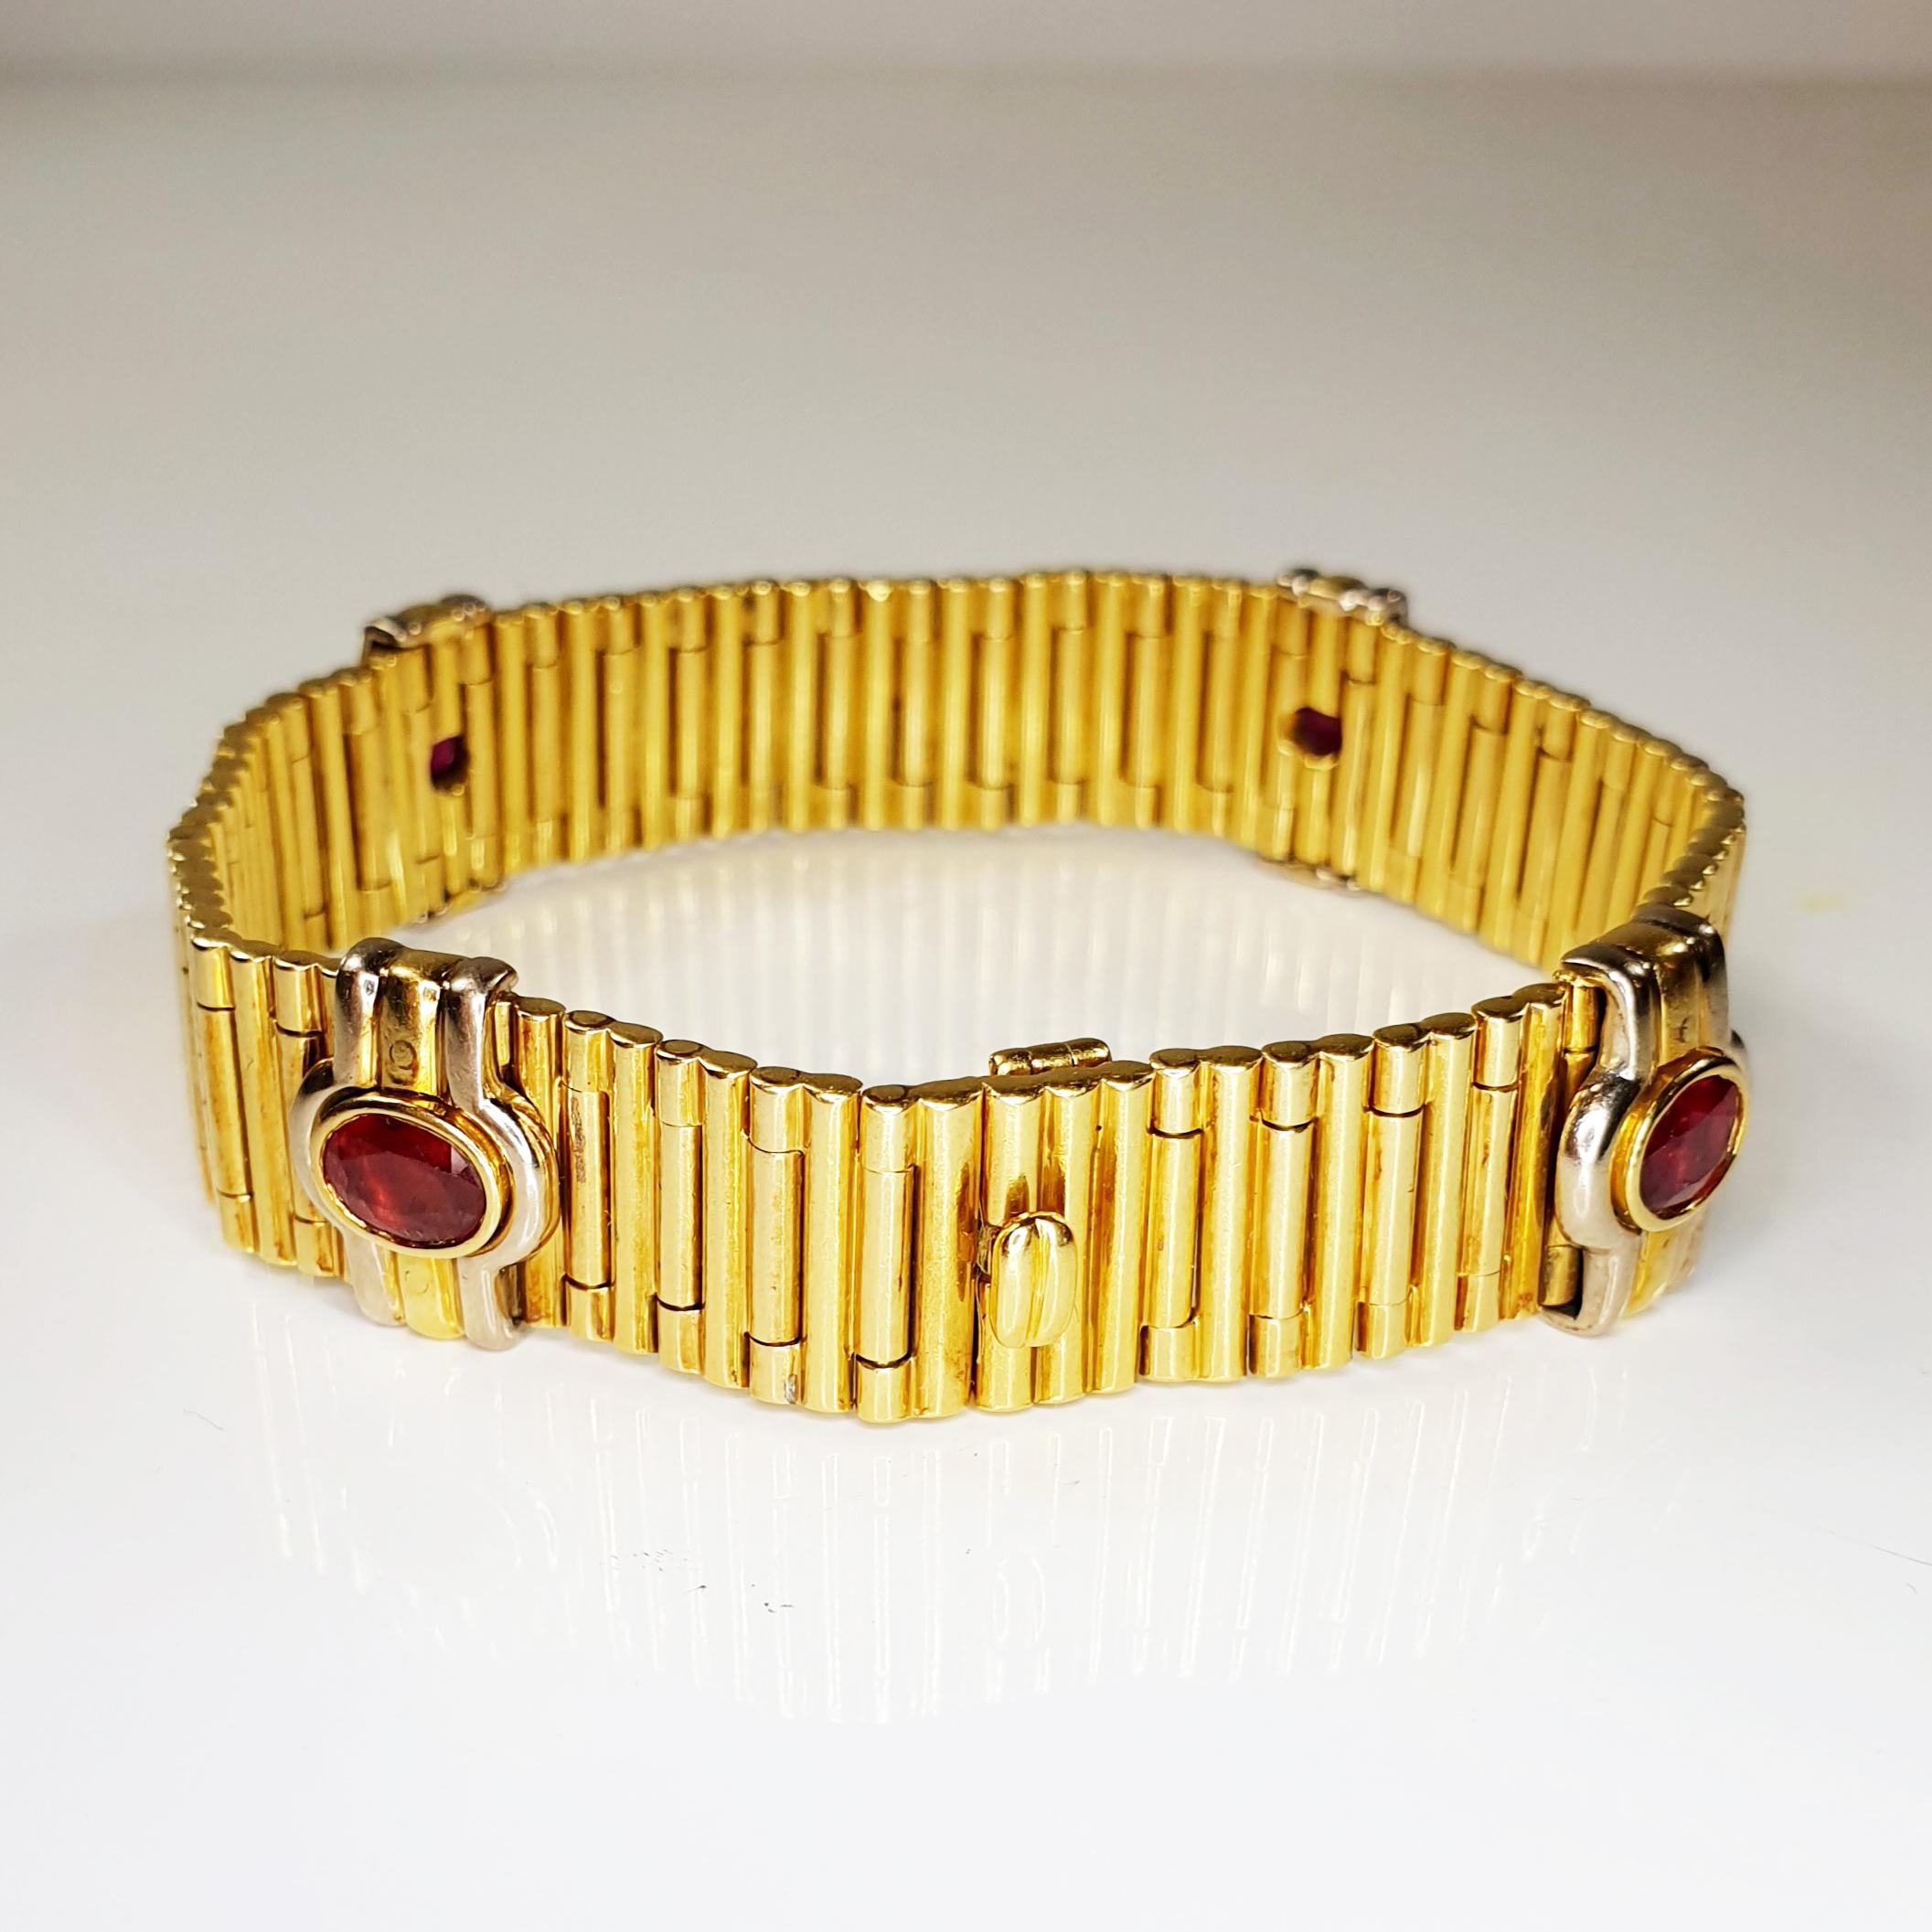 1980´s rouleaux compose bracelet manchette with 18k yellow and four 4ct oval rubies framed in yellow and white gold. A collectors piece. 
The Rouleaux (a.k.a. Bullet) bracelet has its name derived from the French word for «rolls». It consists of a